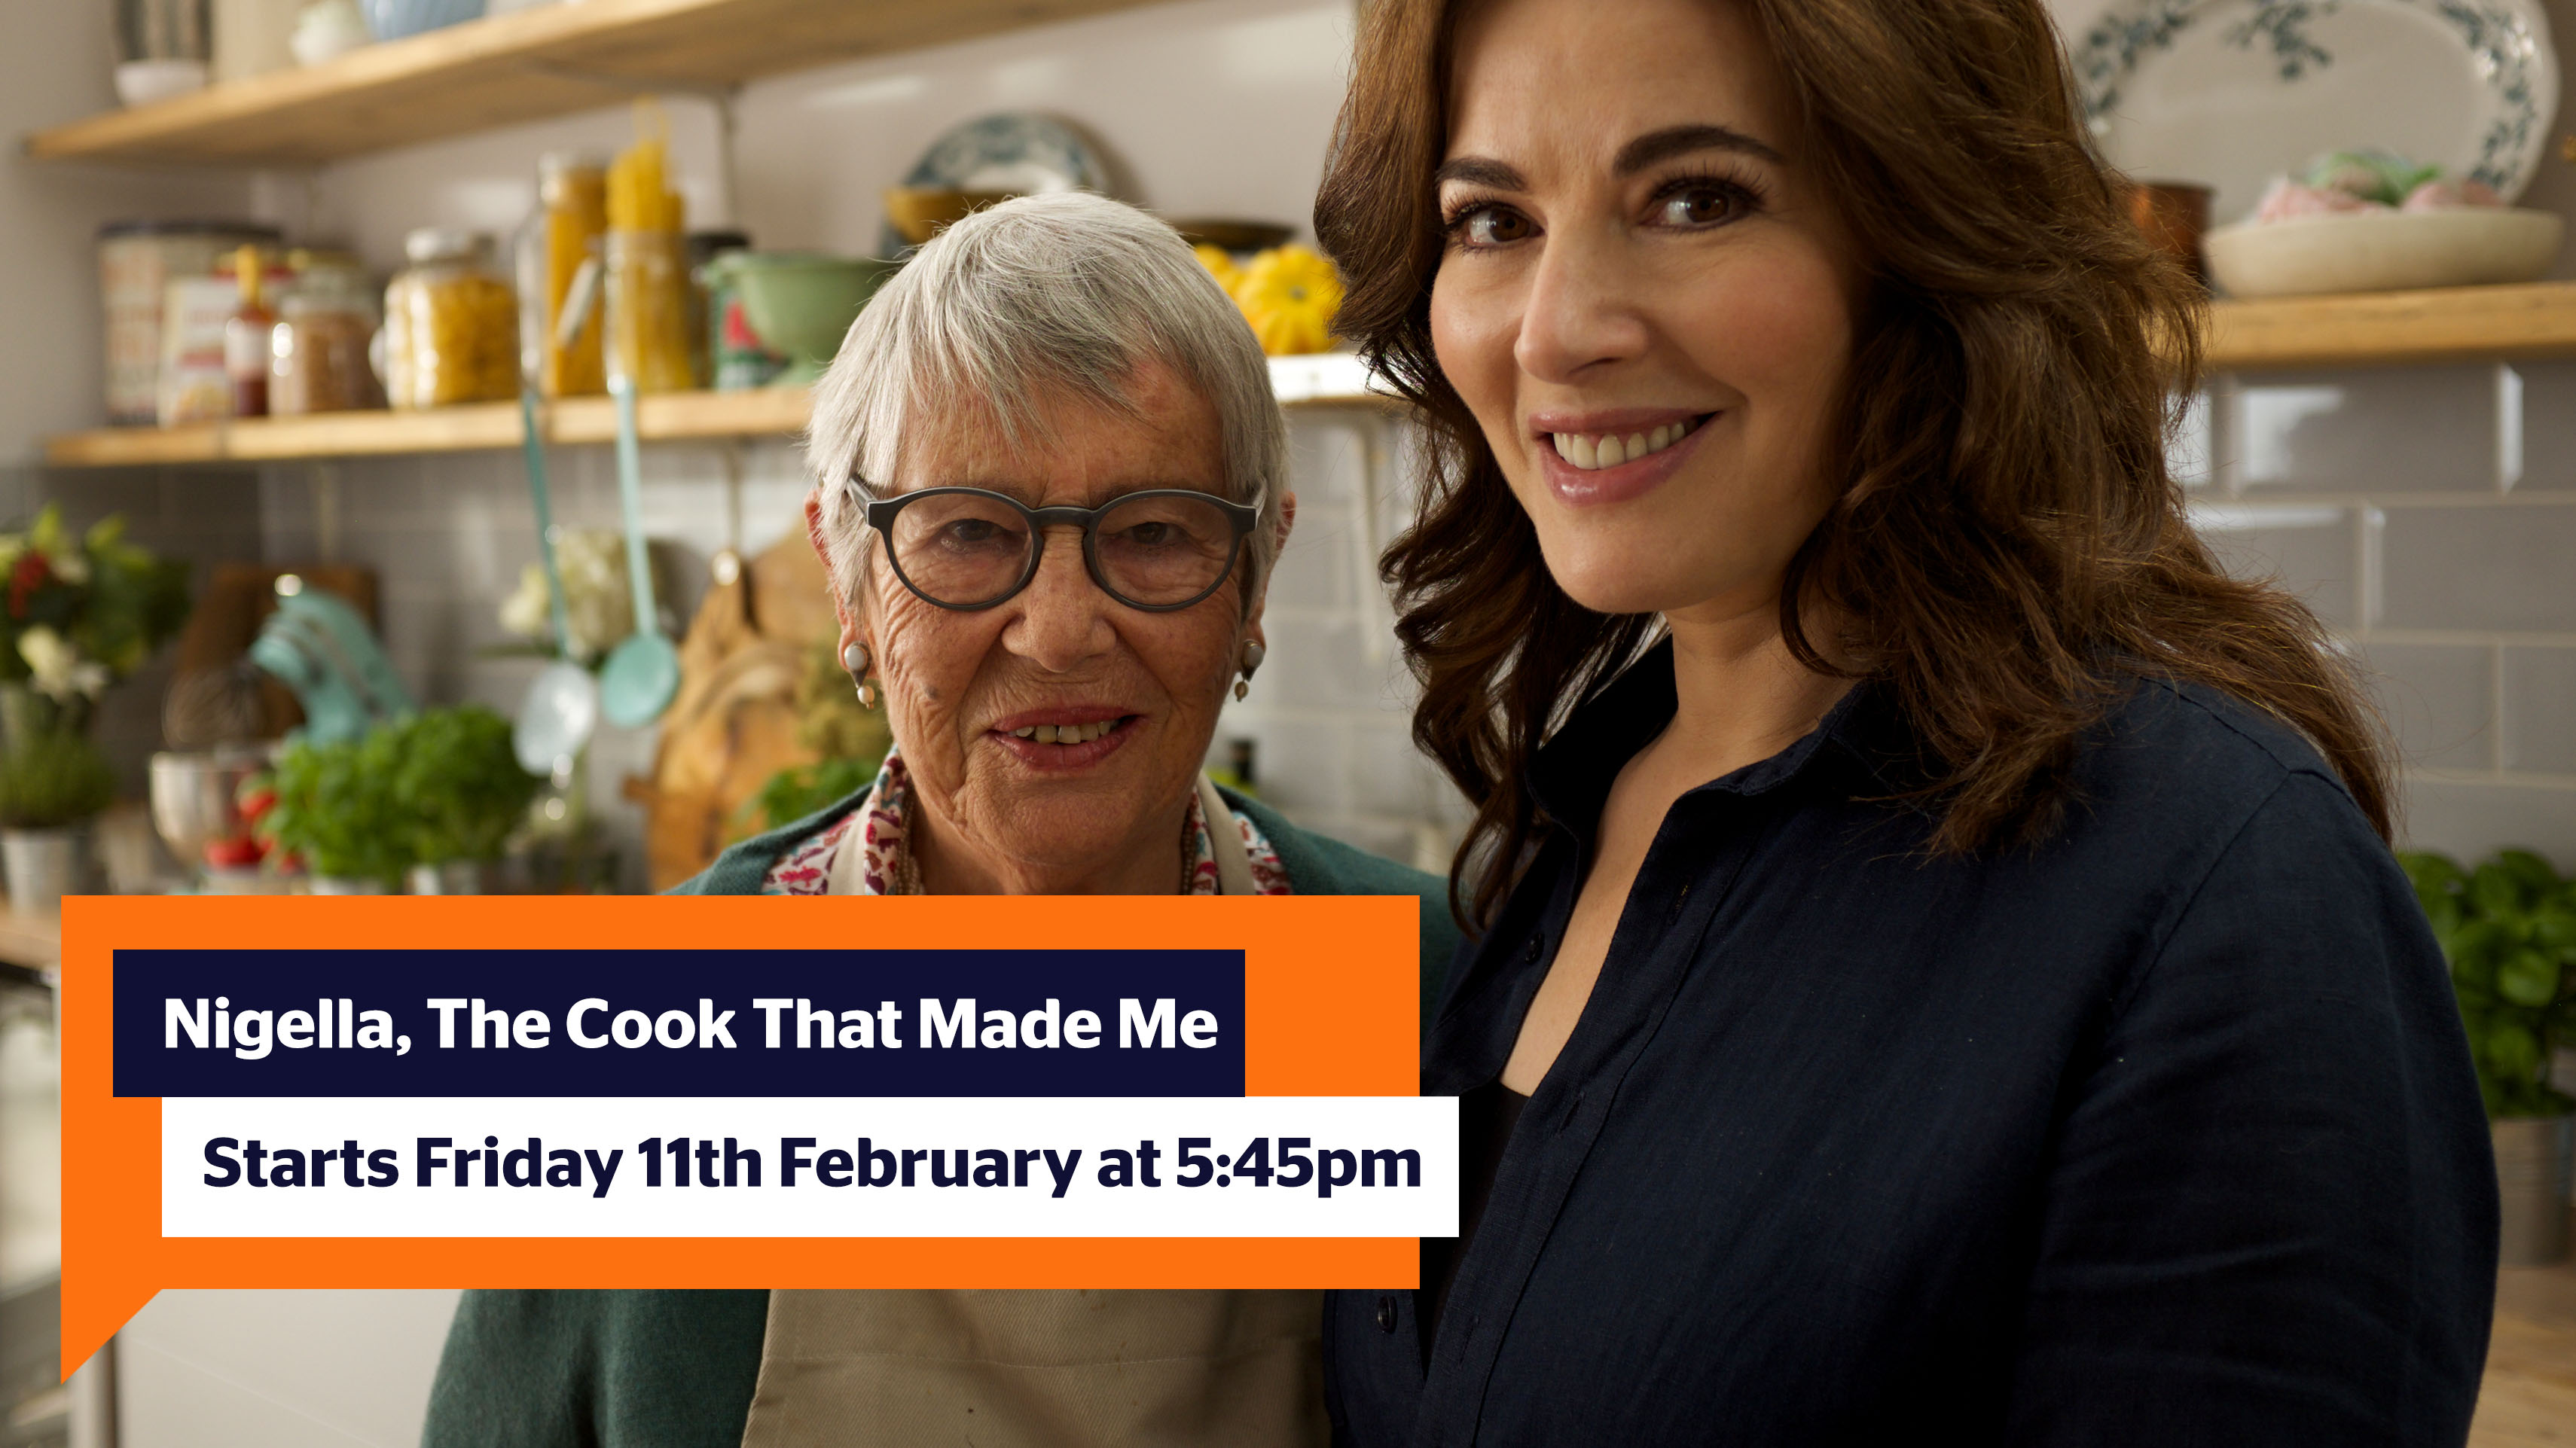 Nigella, the cook that made me starts Friday 11th February at 5:45pm